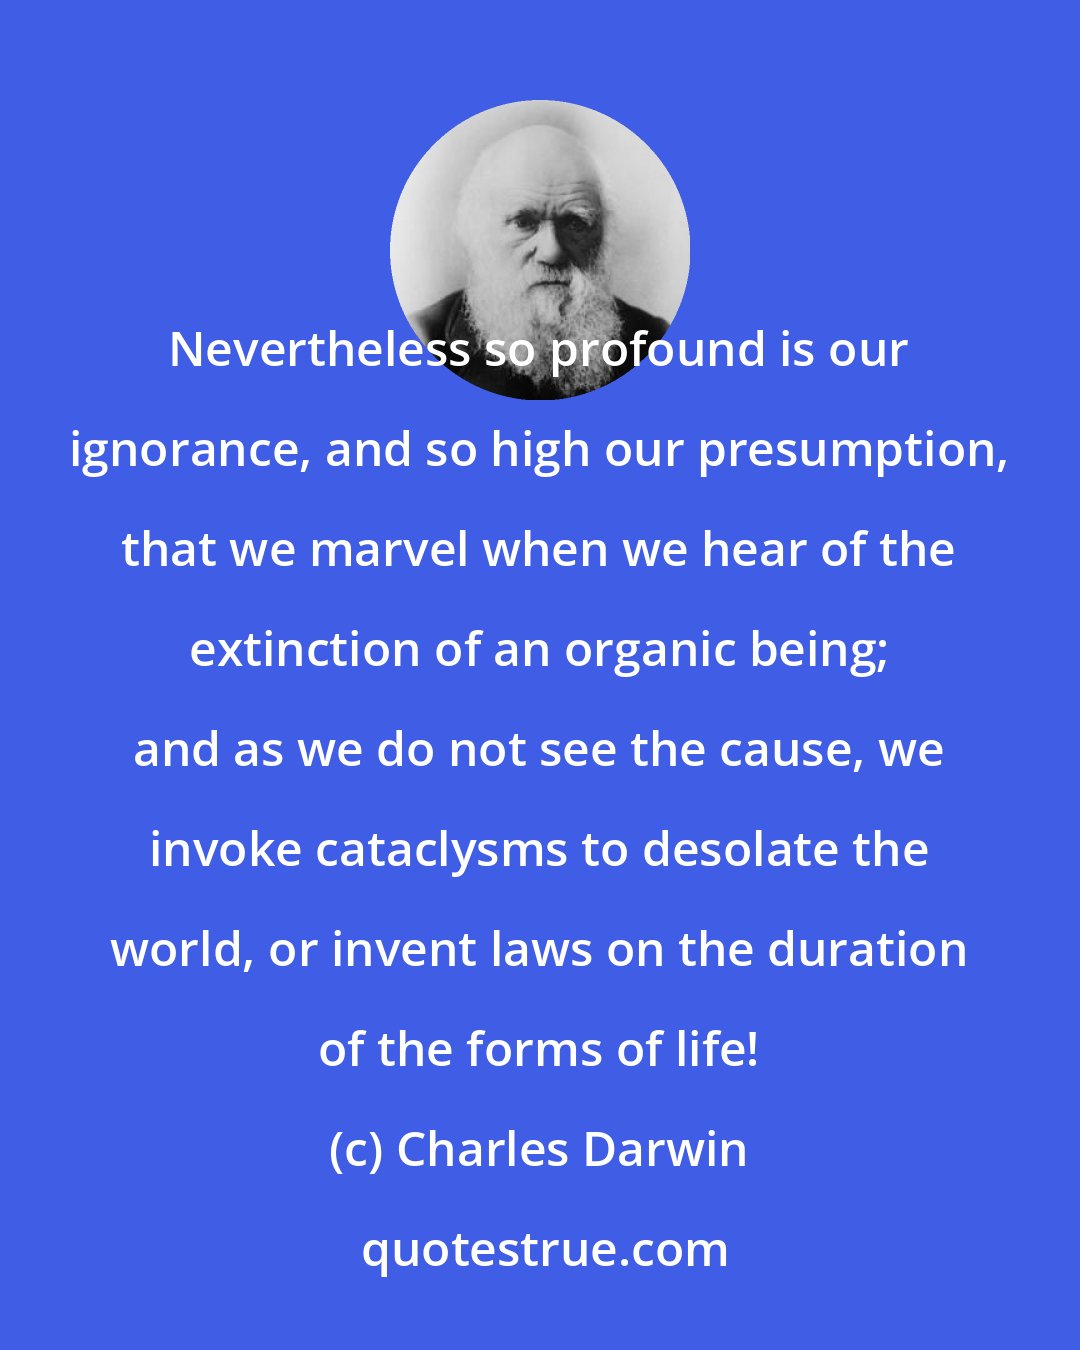 Charles Darwin: Nevertheless so profound is our ignorance, and so high our presumption, that we marvel when we hear of the extinction of an organic being; and as we do not see the cause, we invoke cataclysms to desolate the world, or invent laws on the duration of the forms of life!